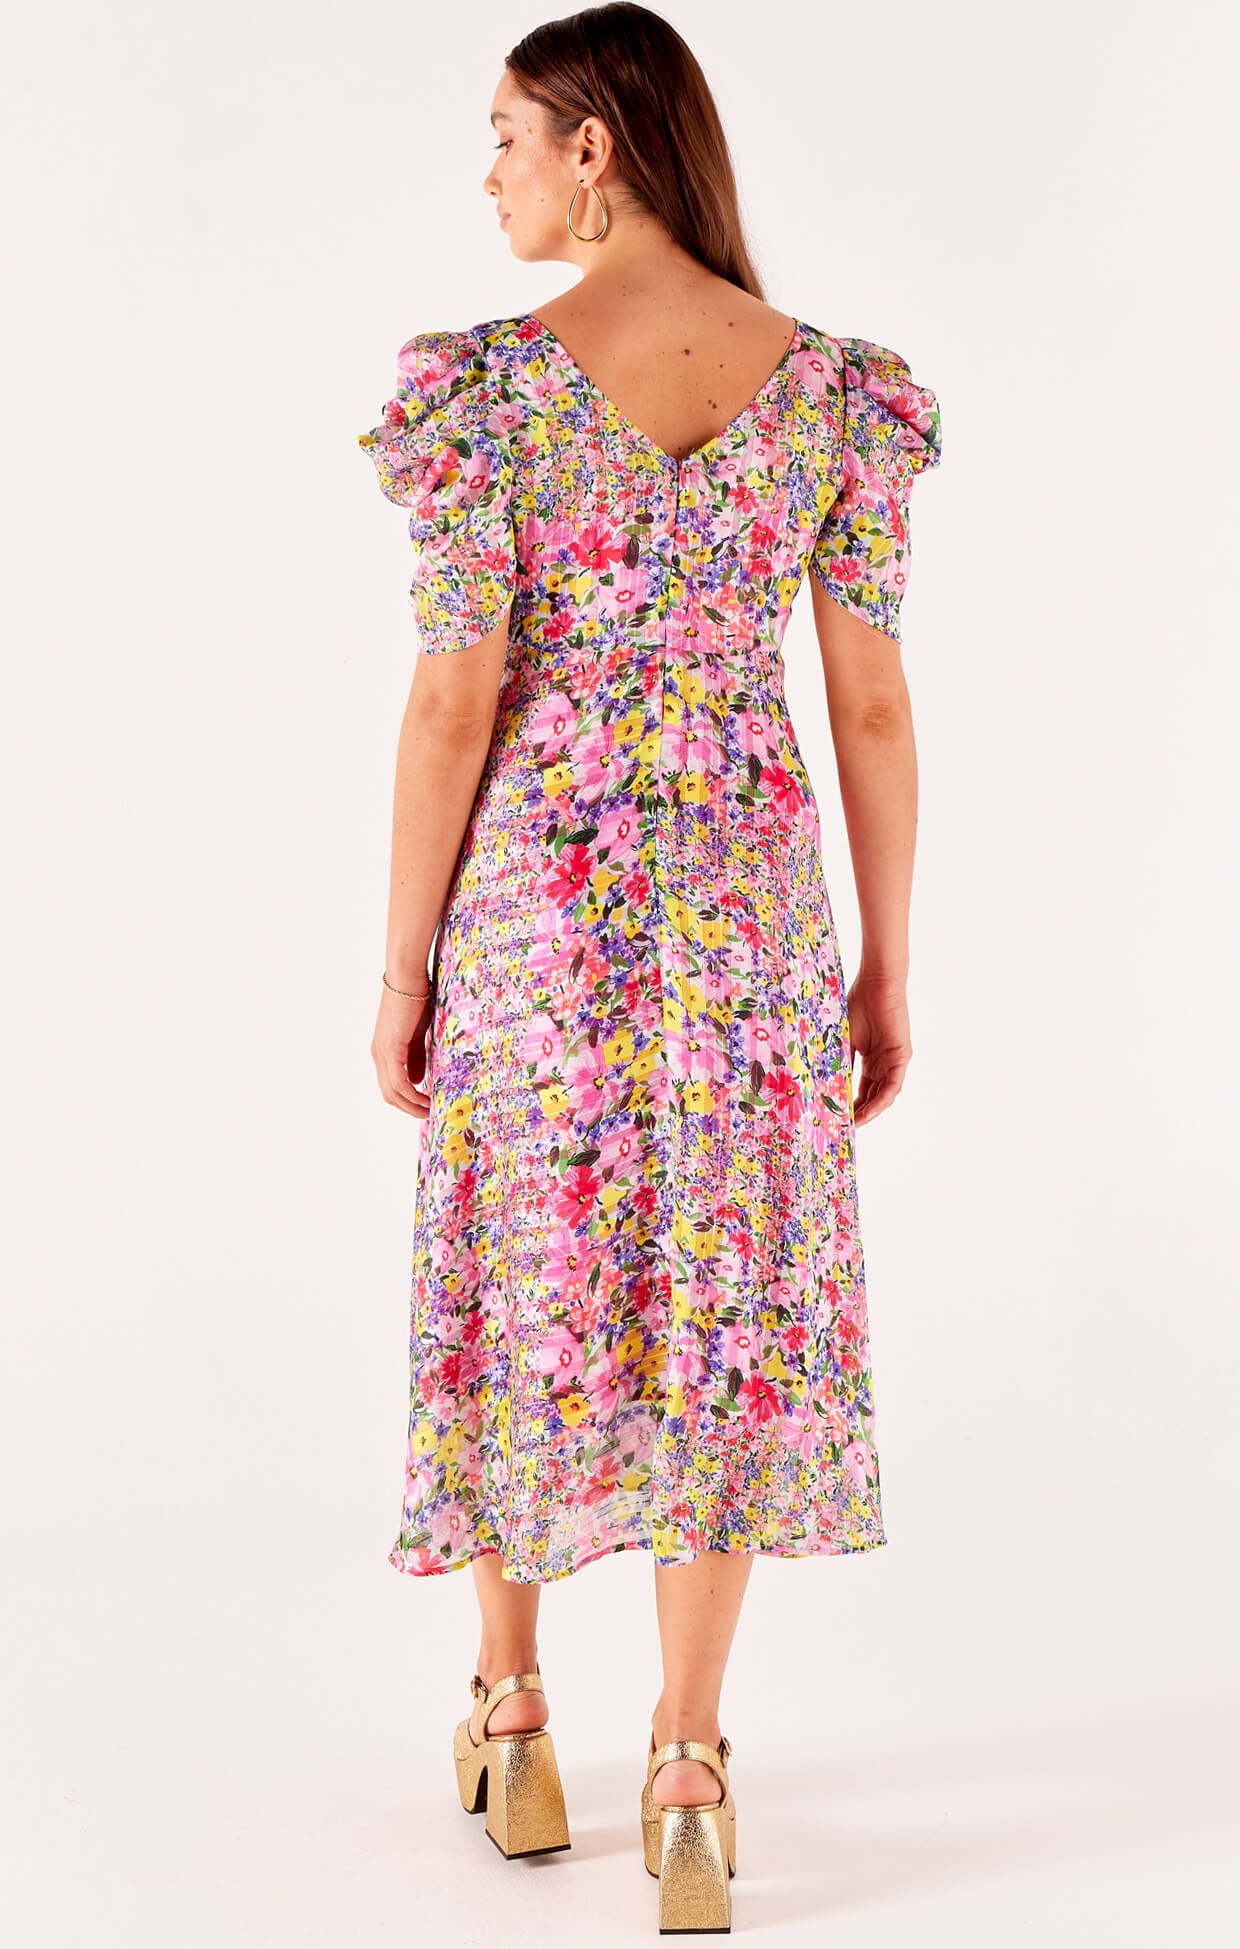 New Blooms Midi Dress in Pink Floral